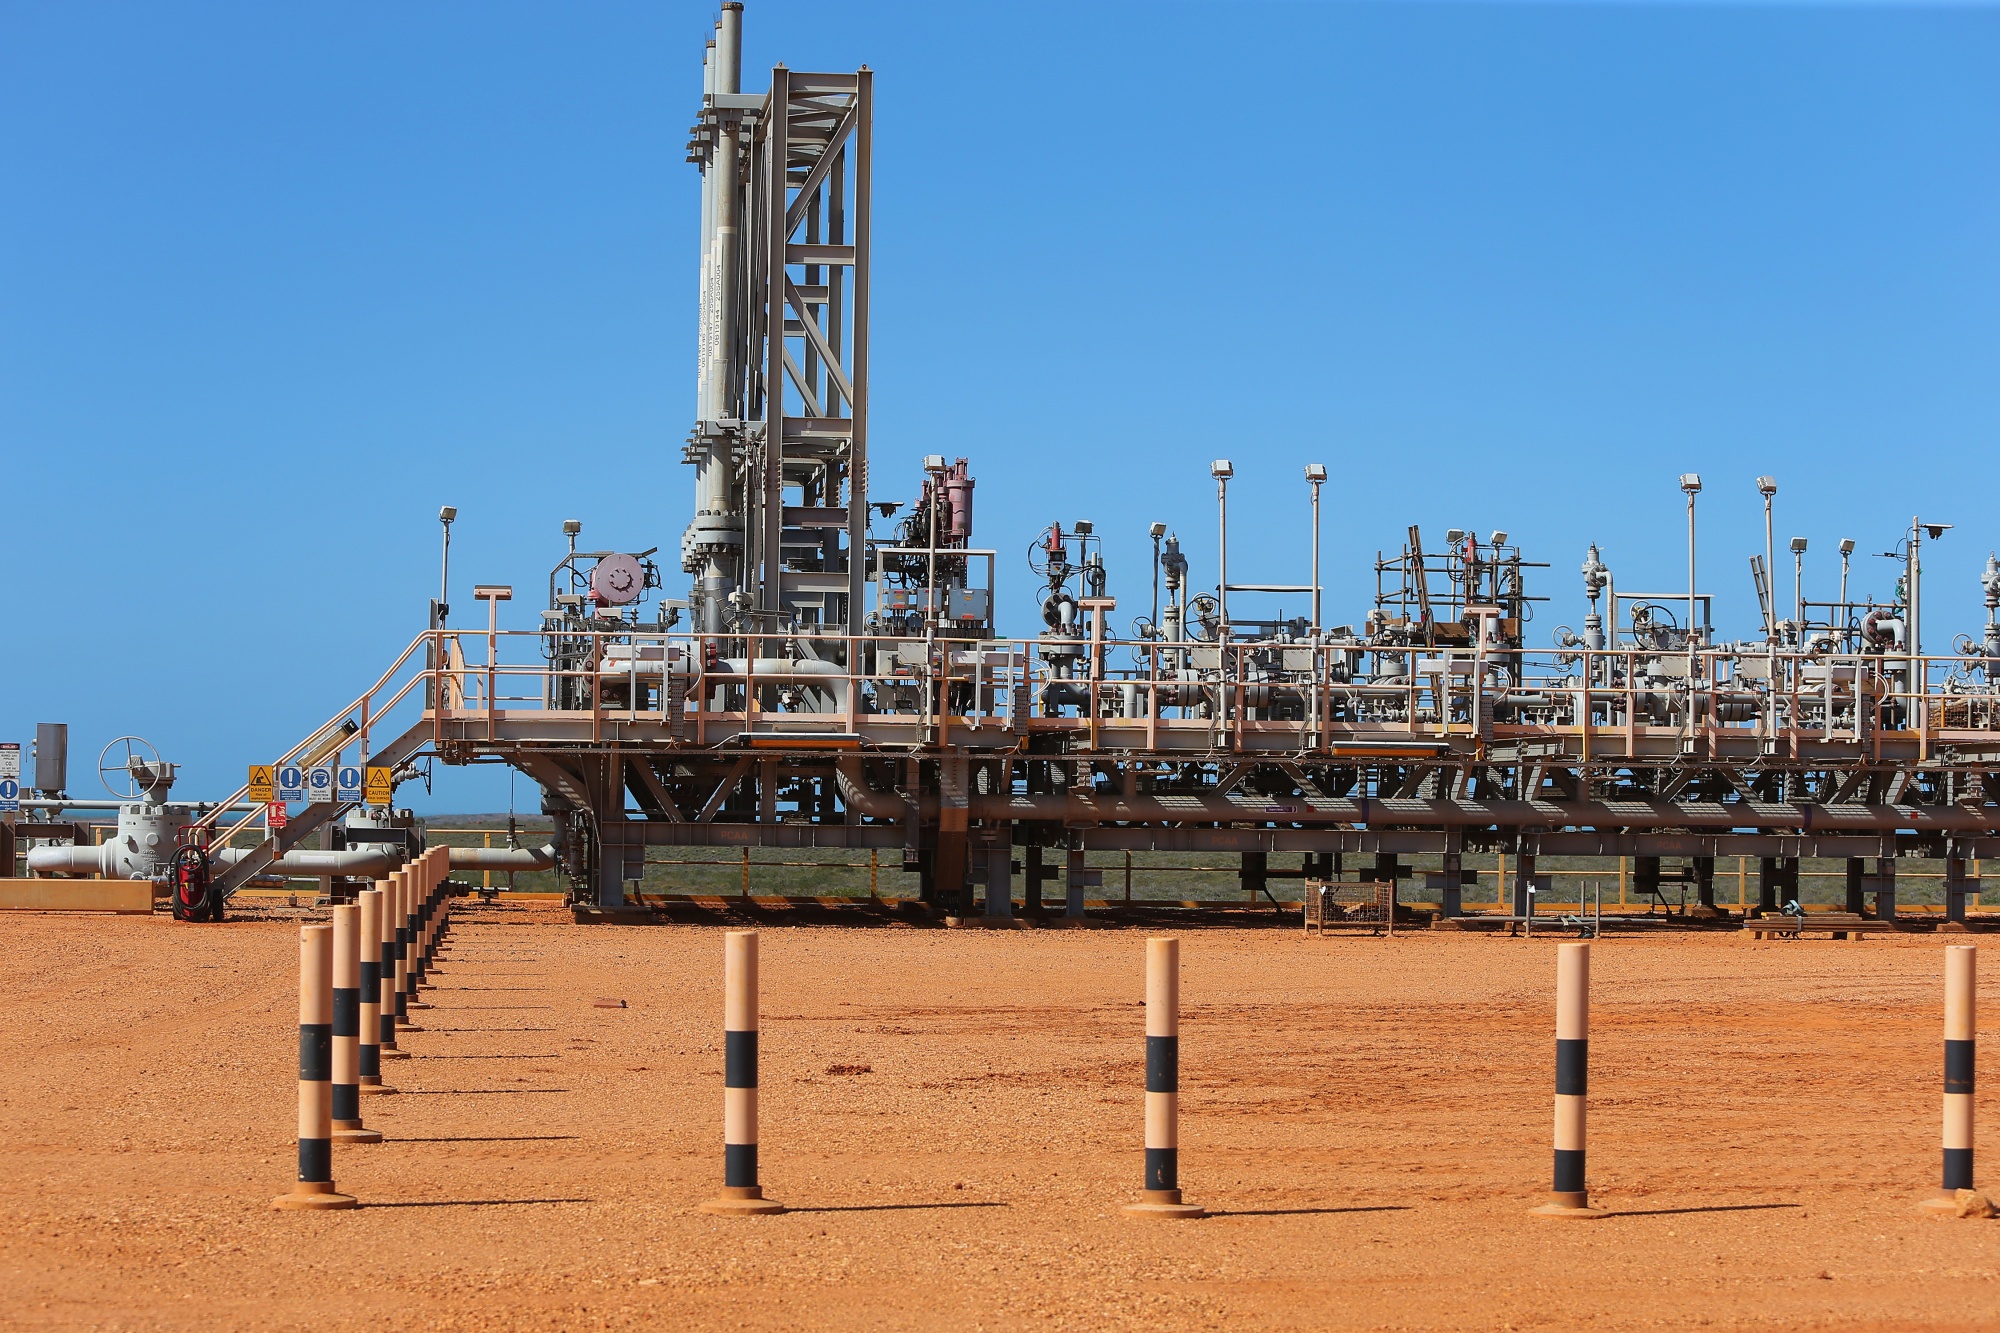 The CO2 injection drill and well center at the Gorgon liquefied natural gas and carbon capture and storage facility, operated by Chevron Corp., on Barrow Island, Australia.&nbsp;